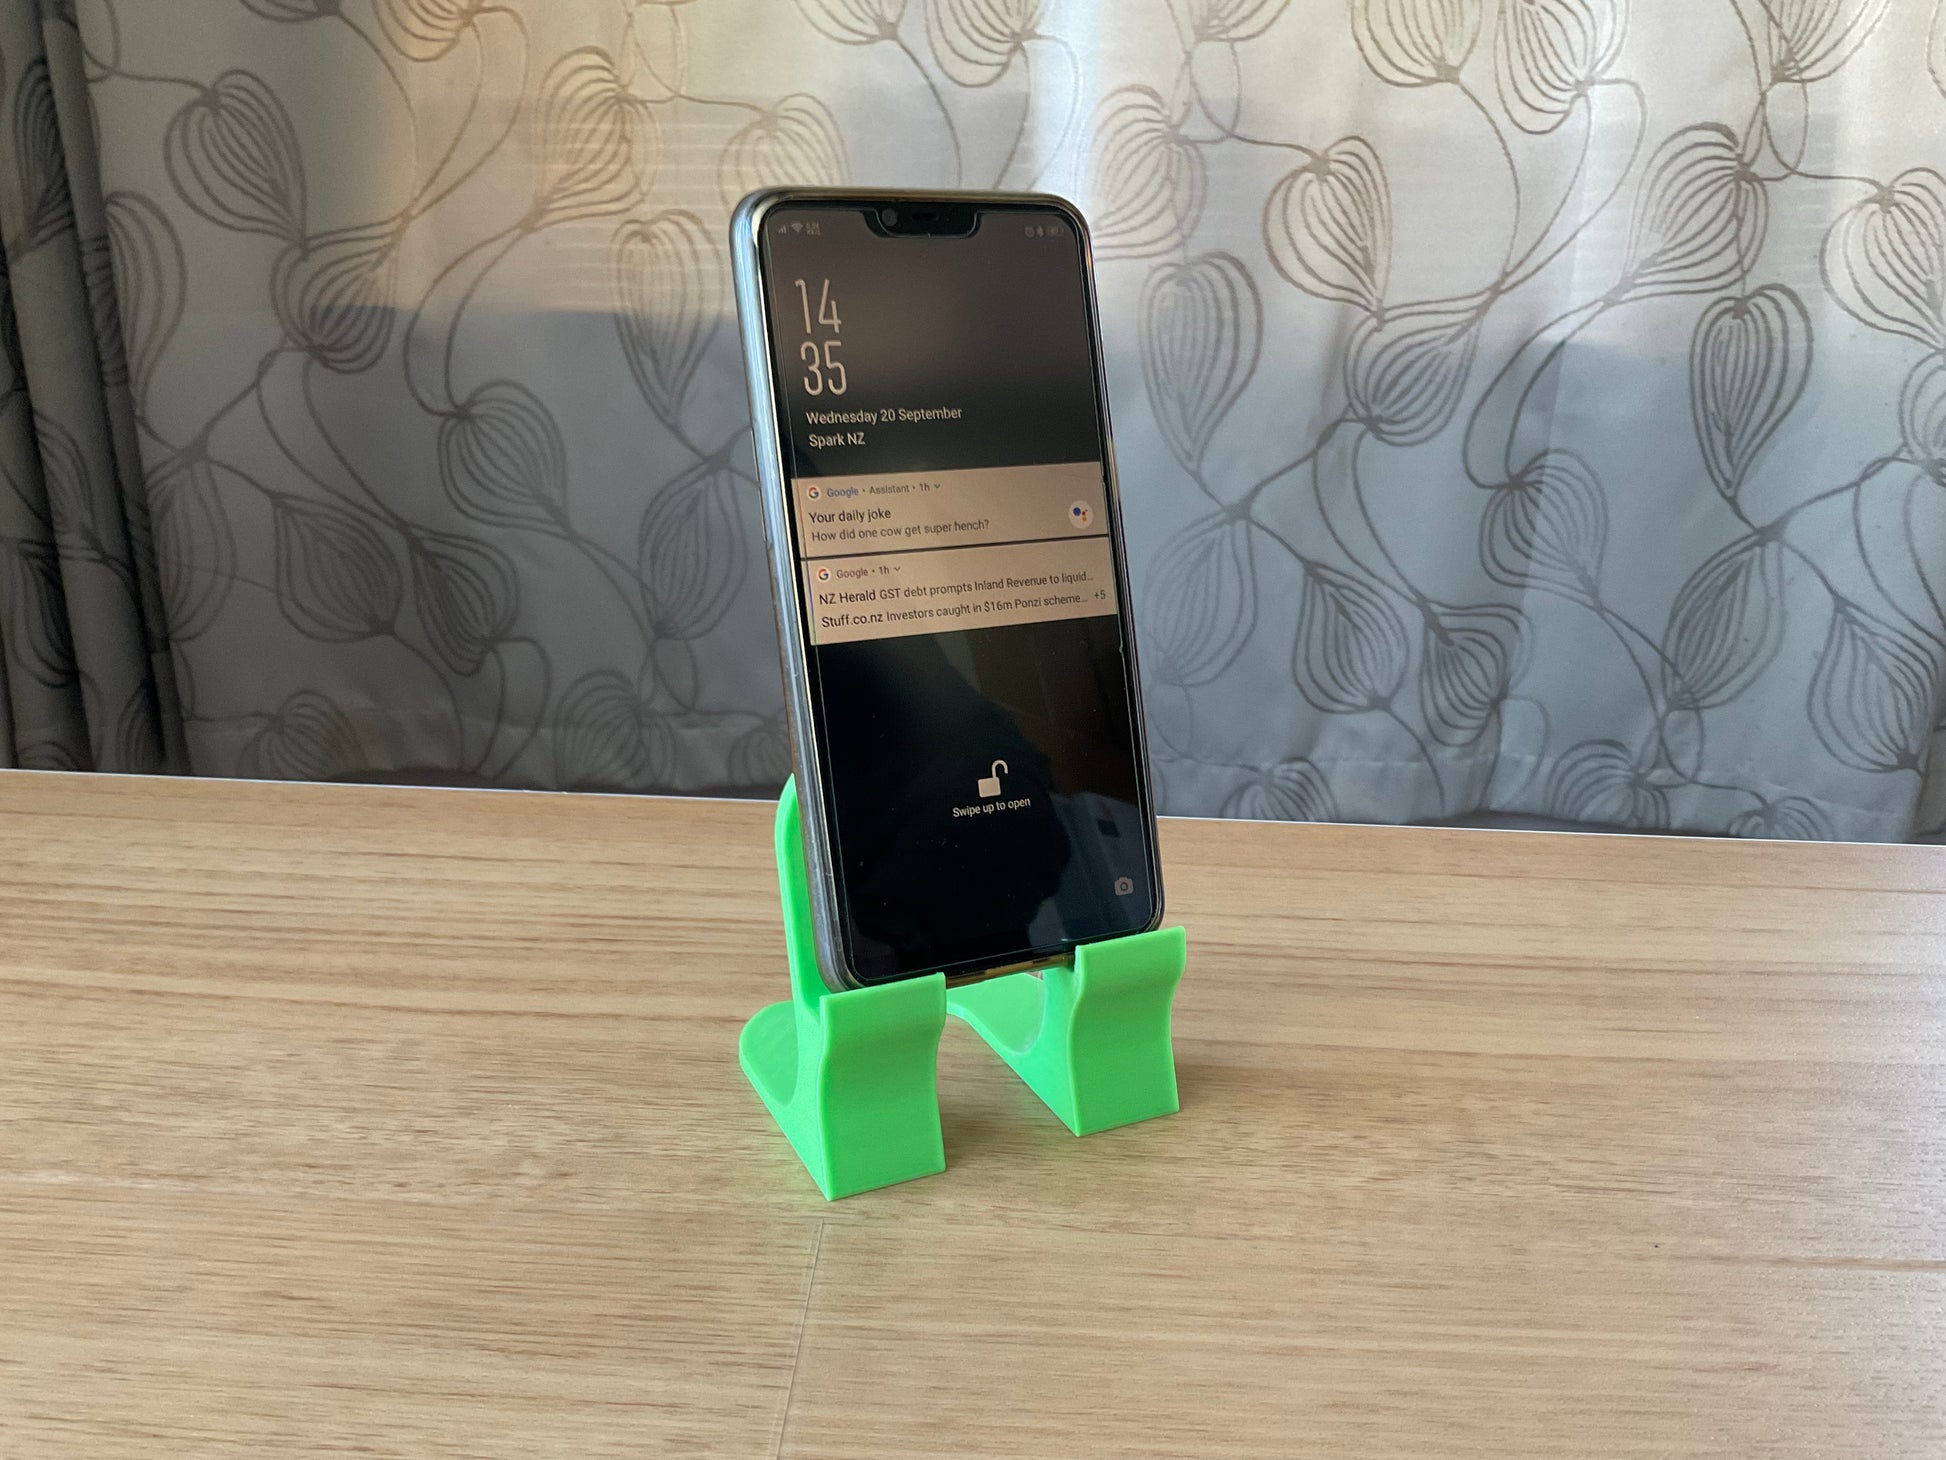 An image of the phone stand in green.